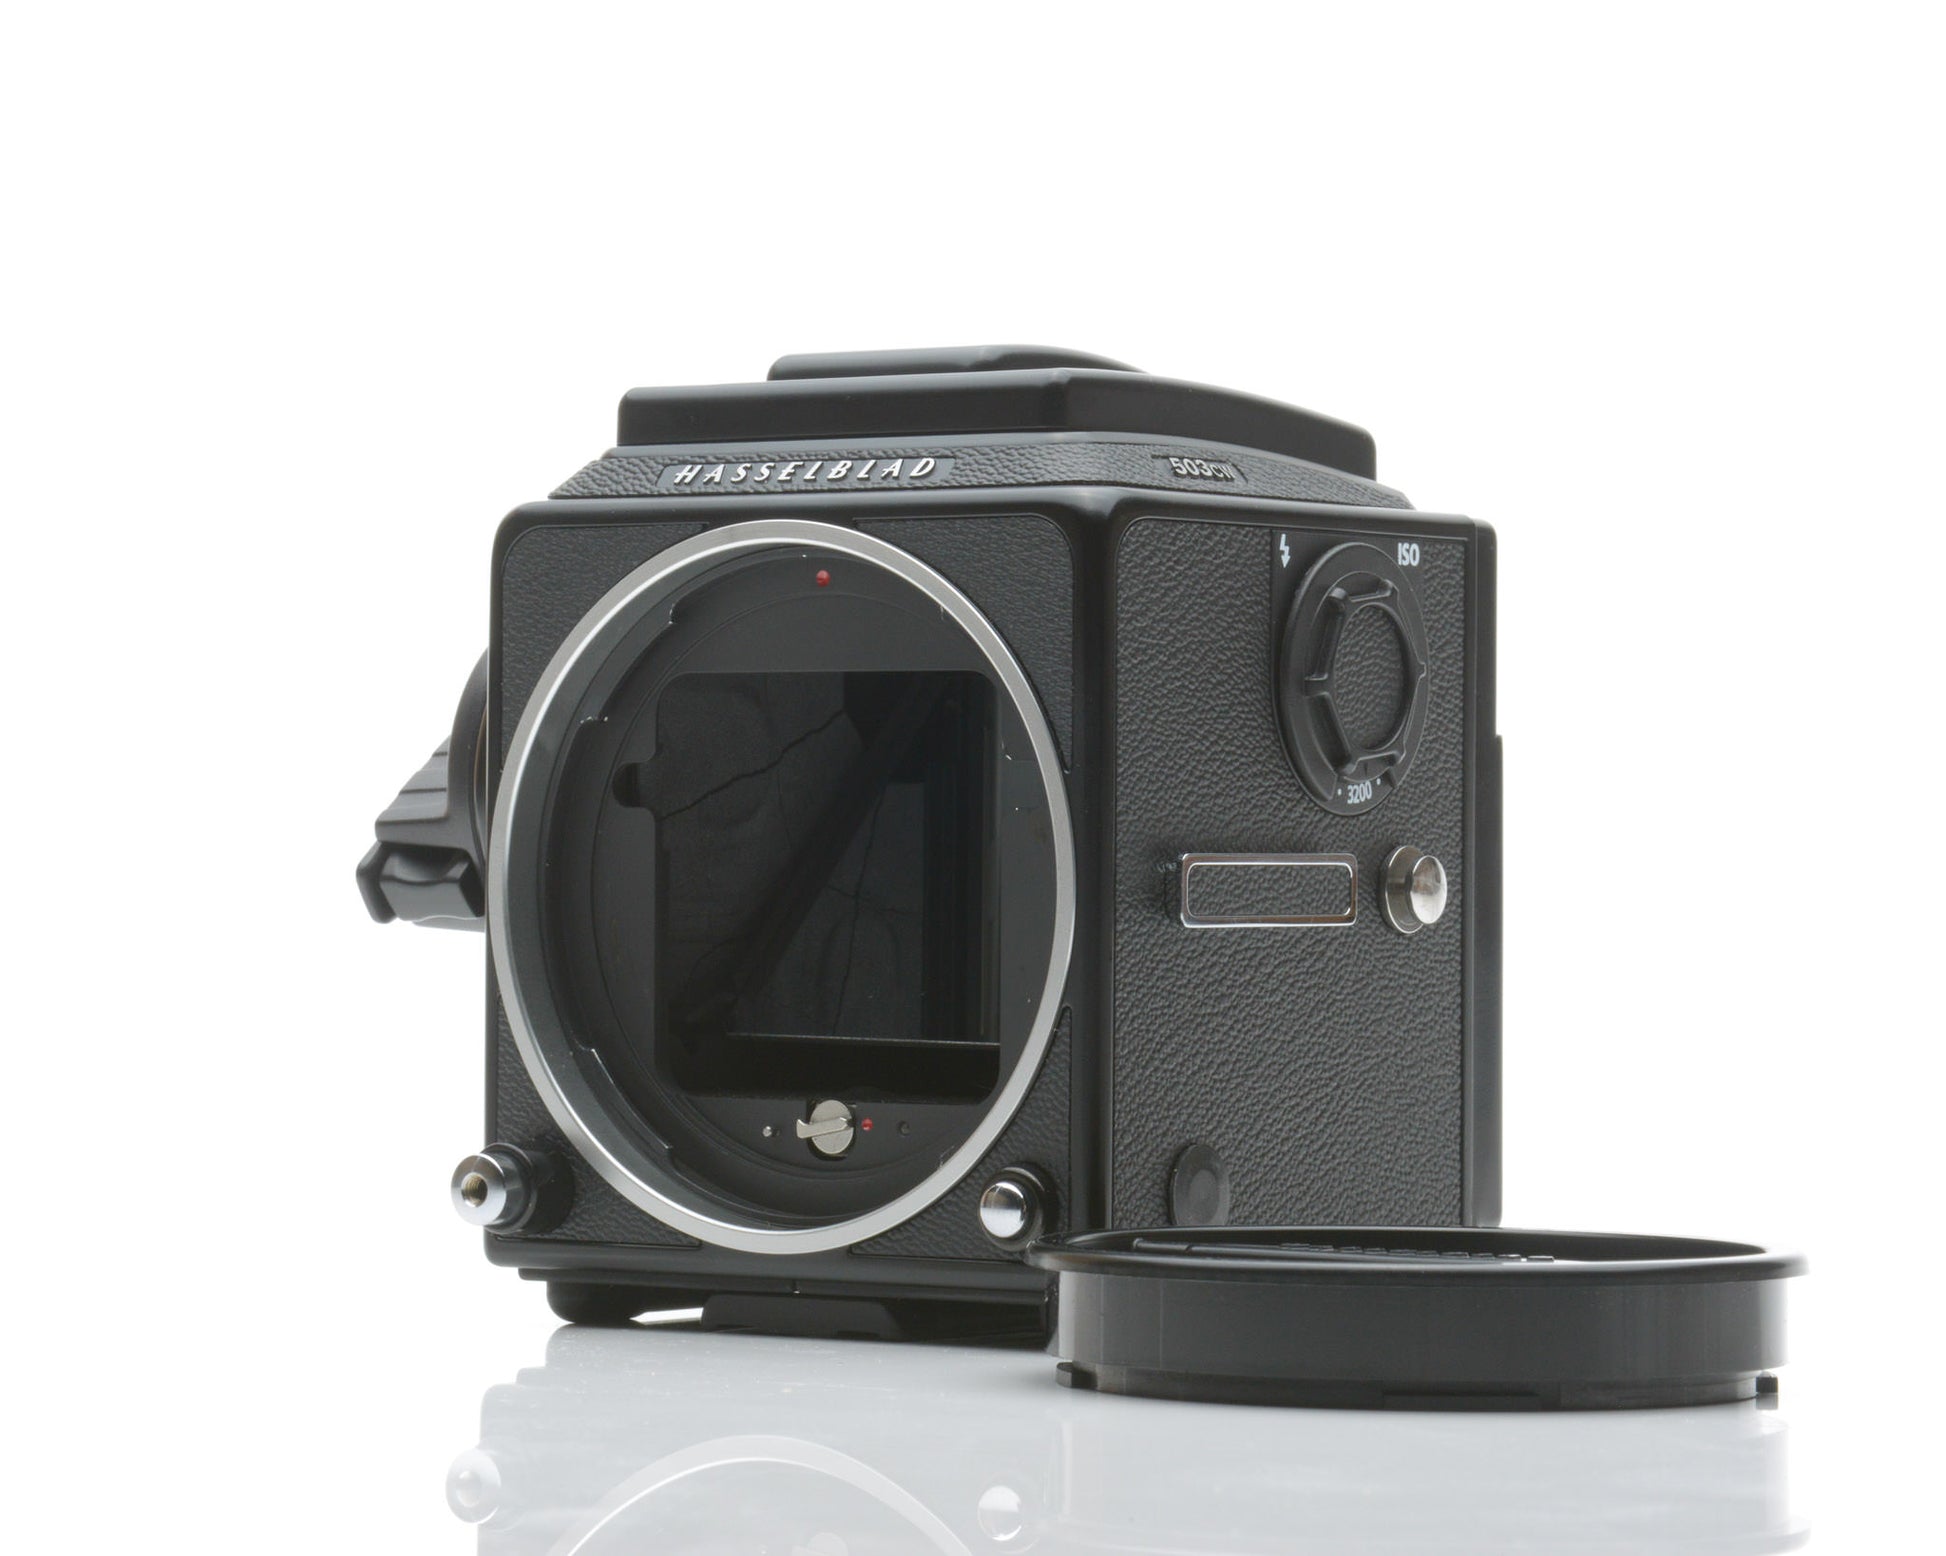 Hasselblad 503CW Black Body with Box Acute Matte D 42217 ISO 3200 10246